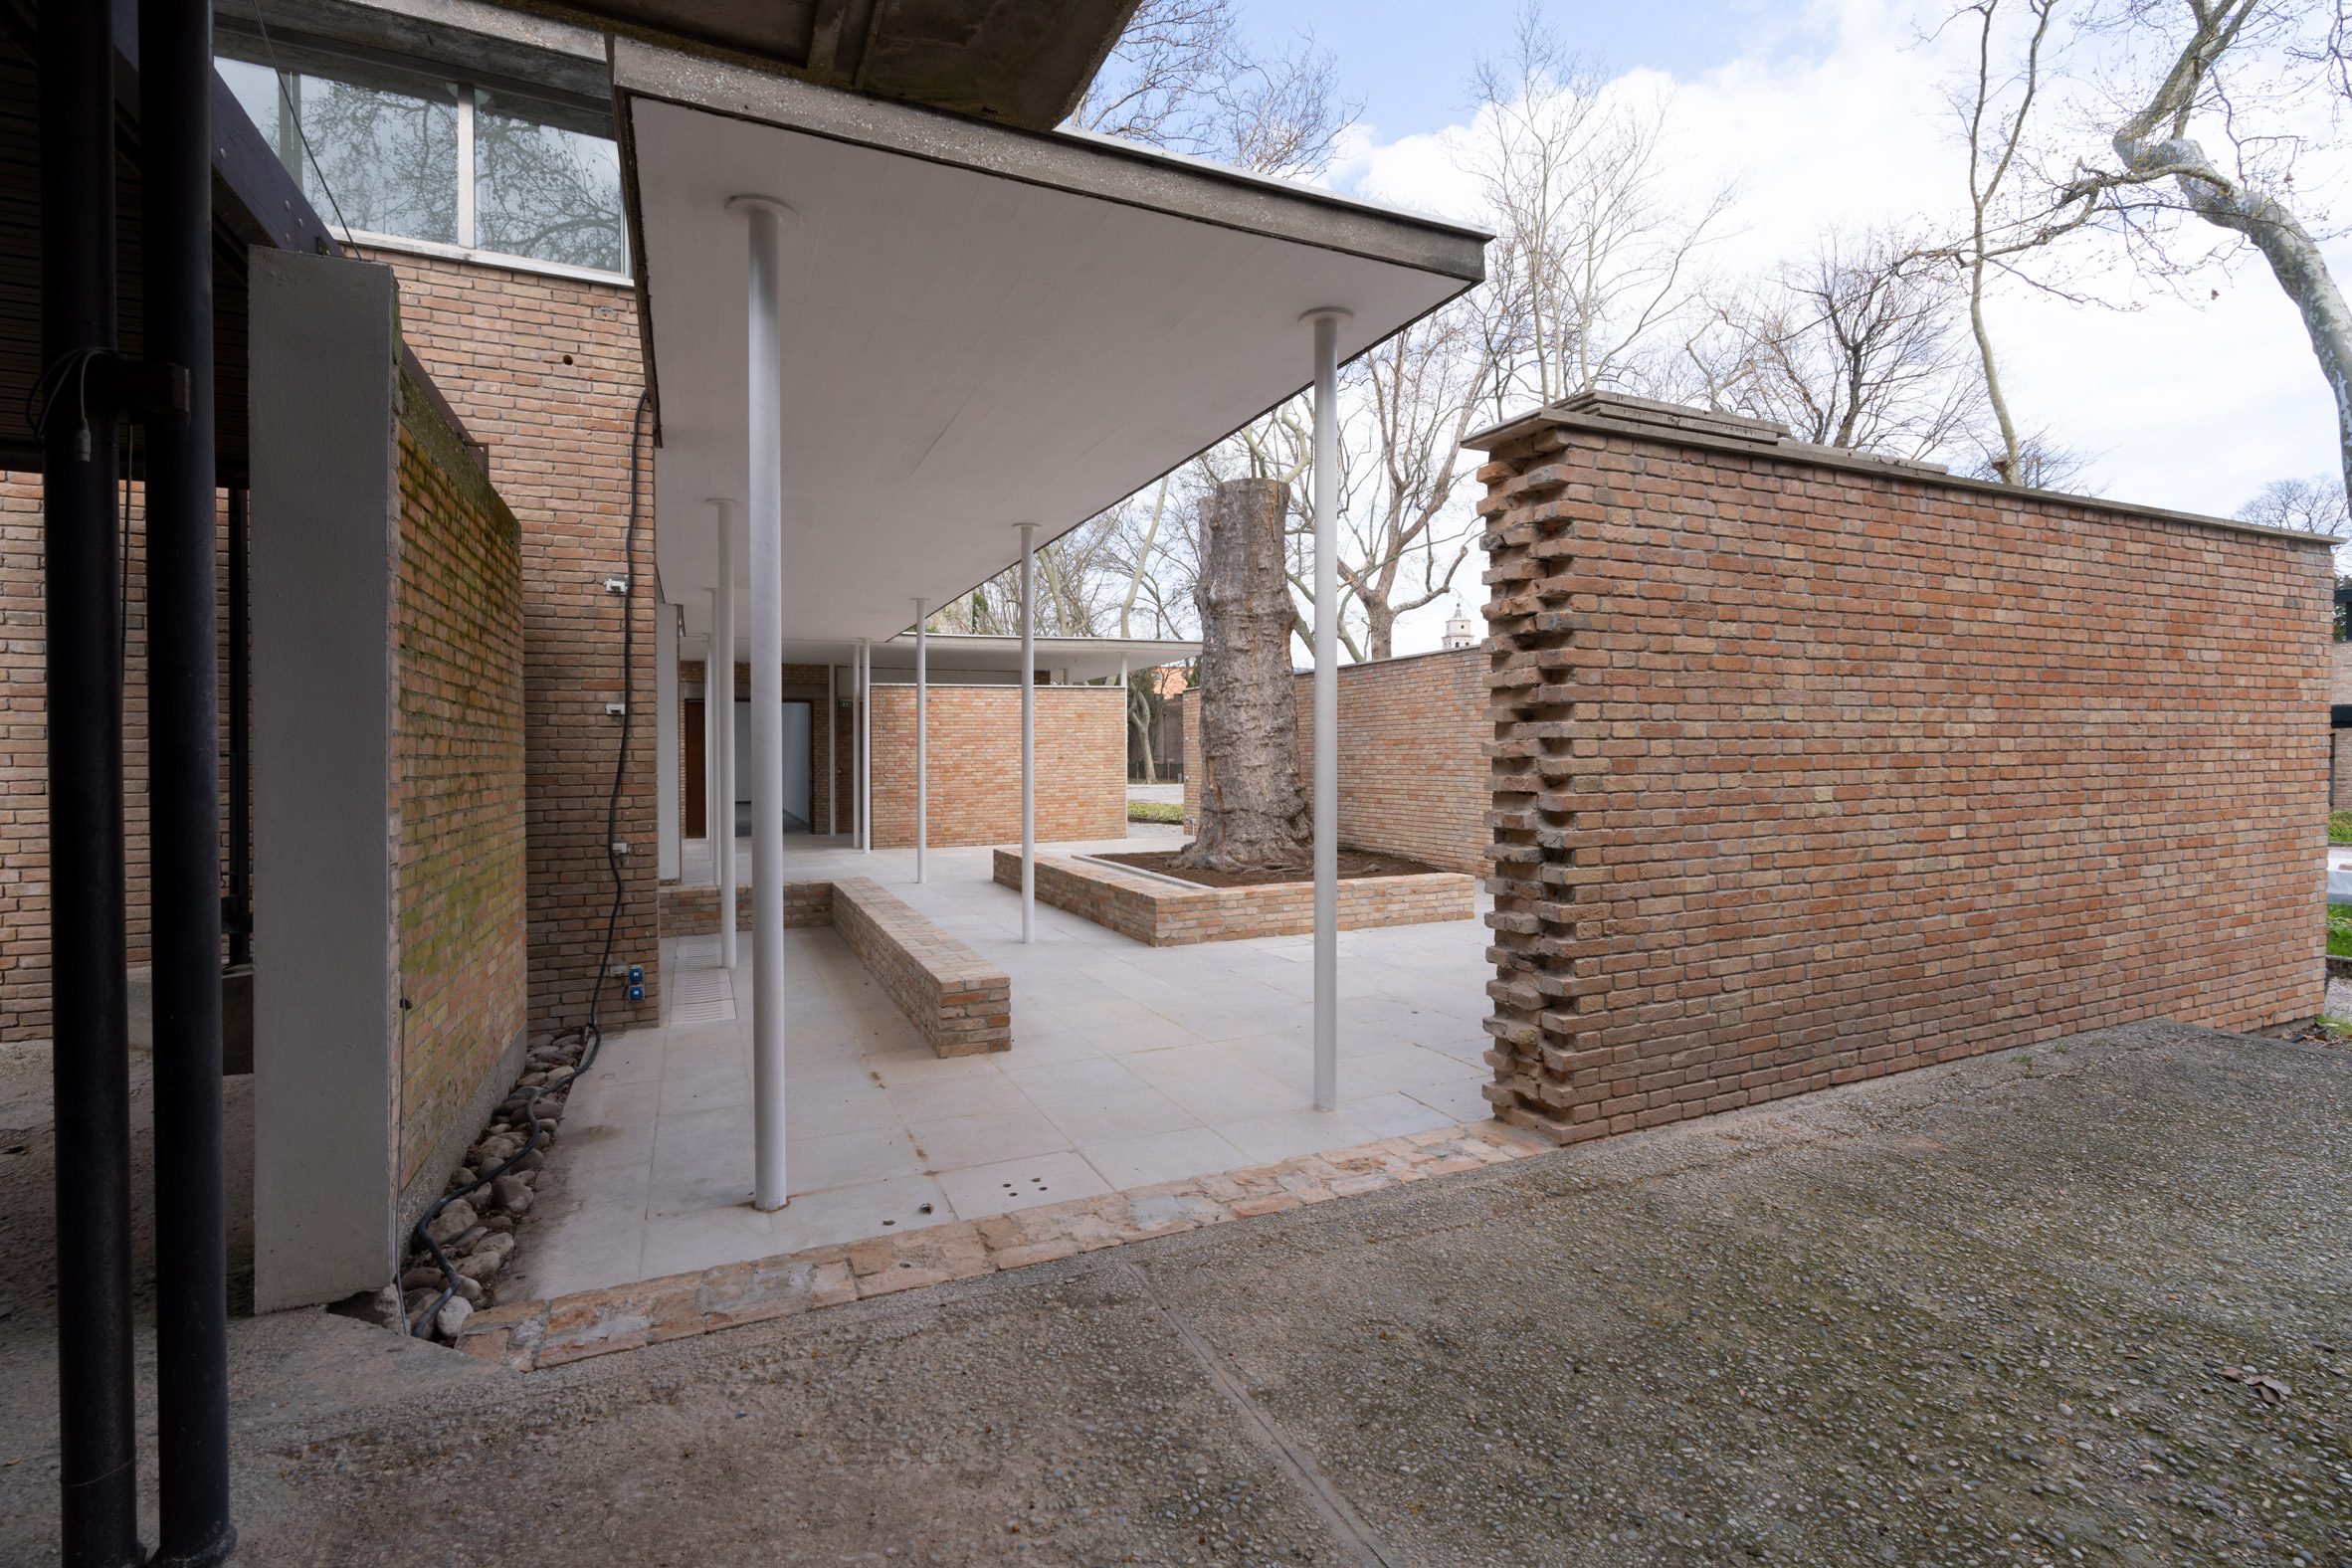 Wall removed at Swiss pavilion at Venice Architecture Biennale